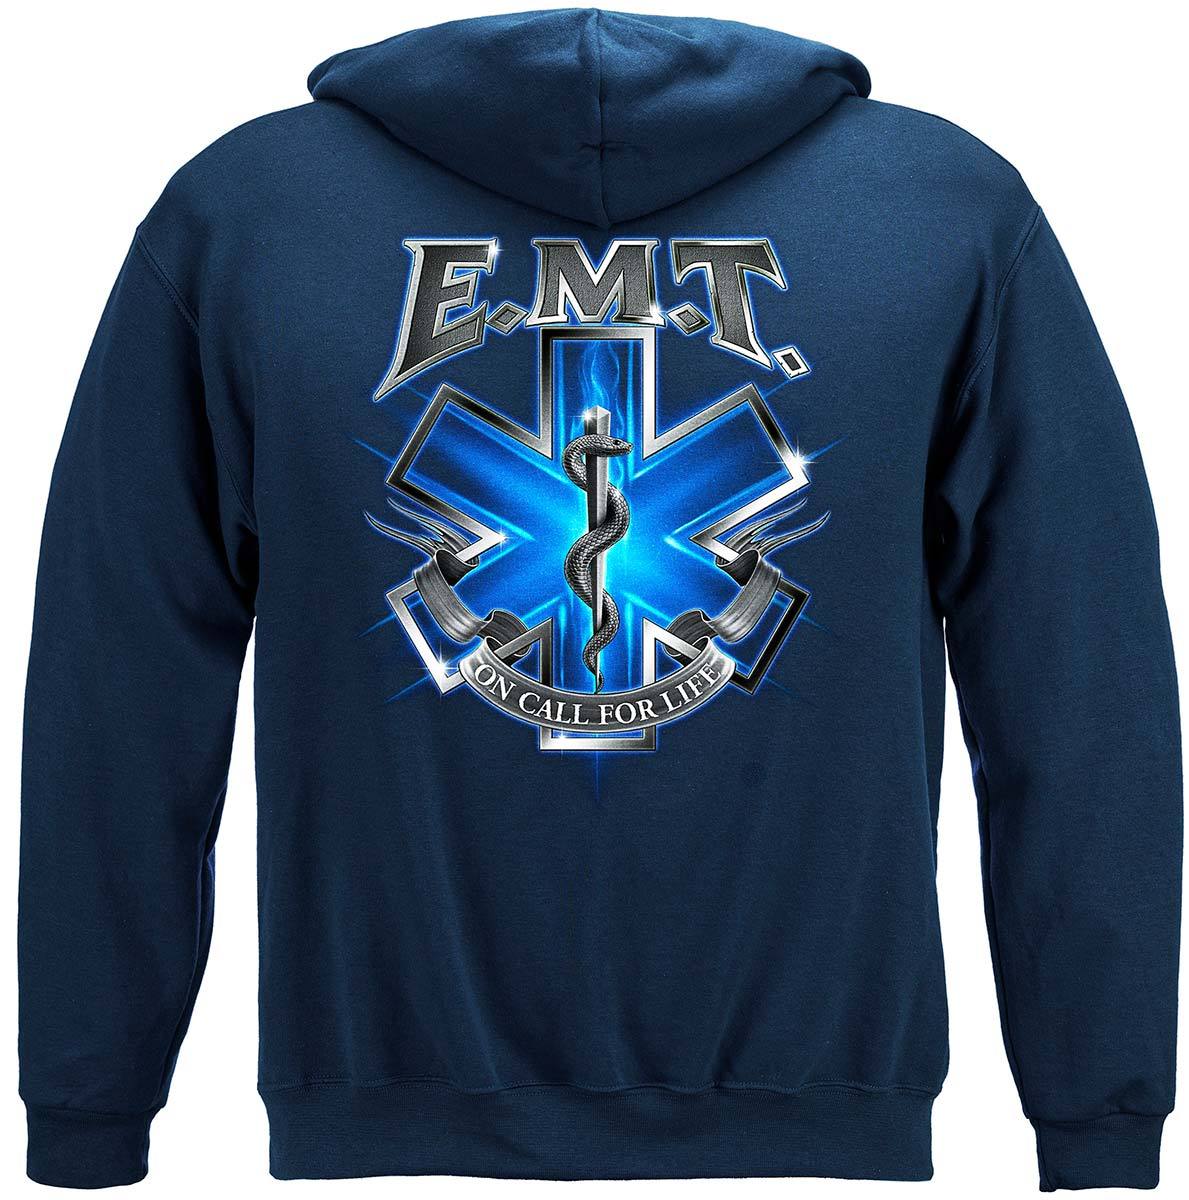 On Call For Life EMT Premium Hooded Sweat Shirt